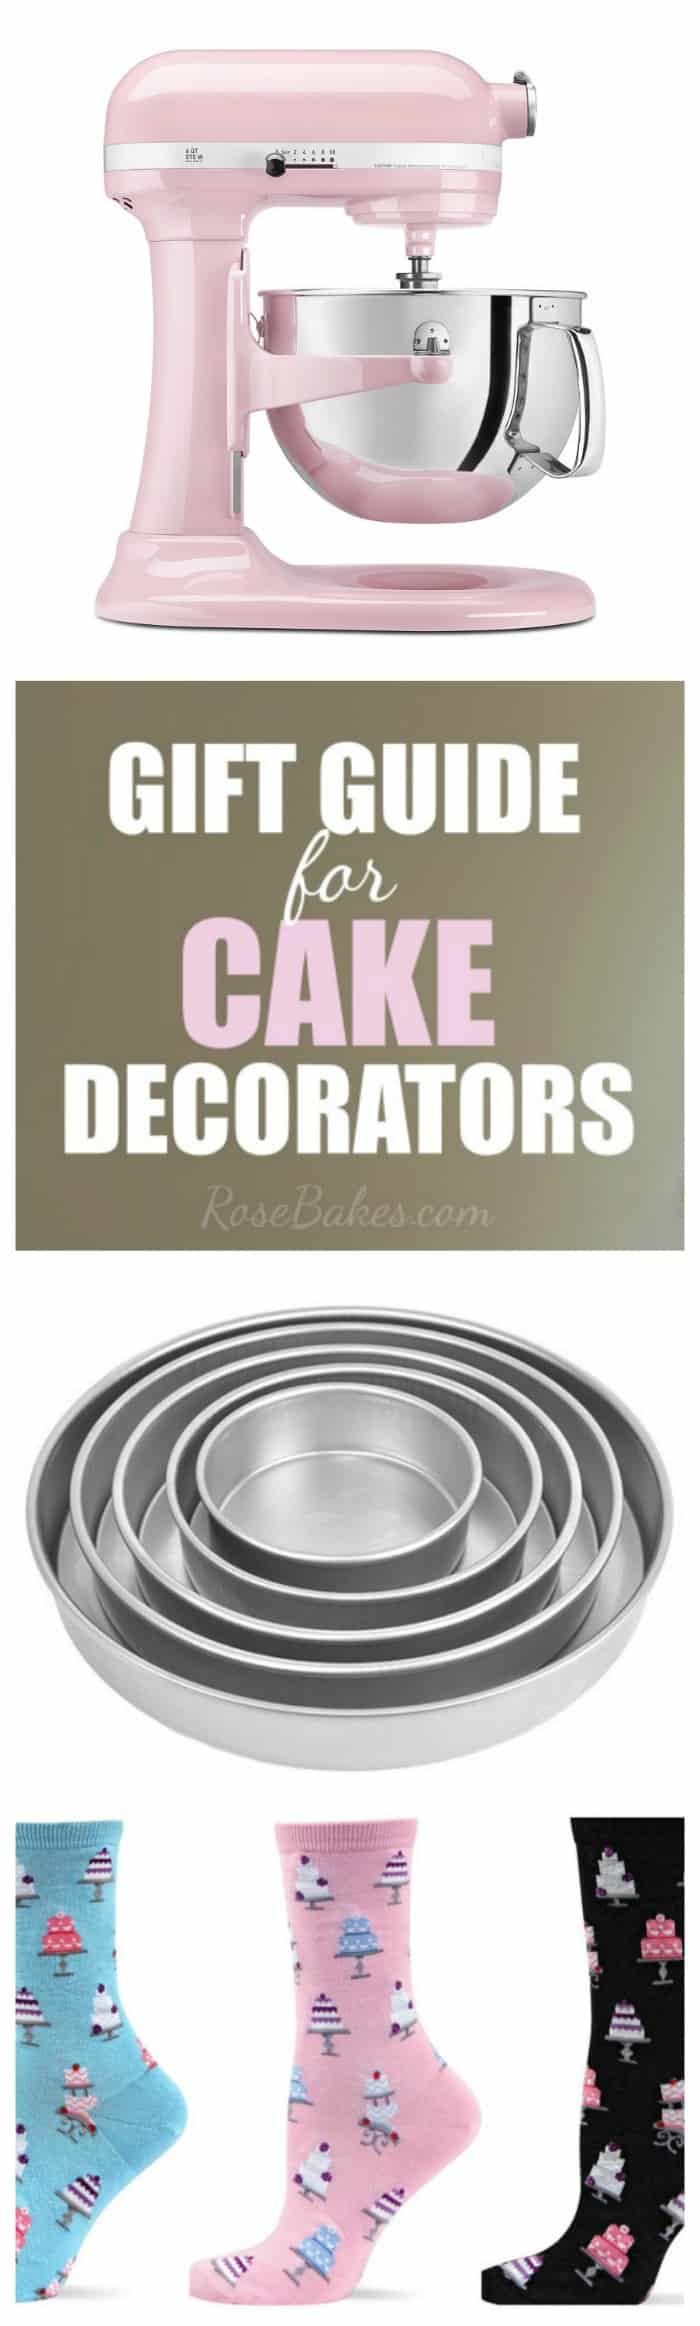 A Gift Guide for Cake Decorators & Bakers - Gifts for any Budget!